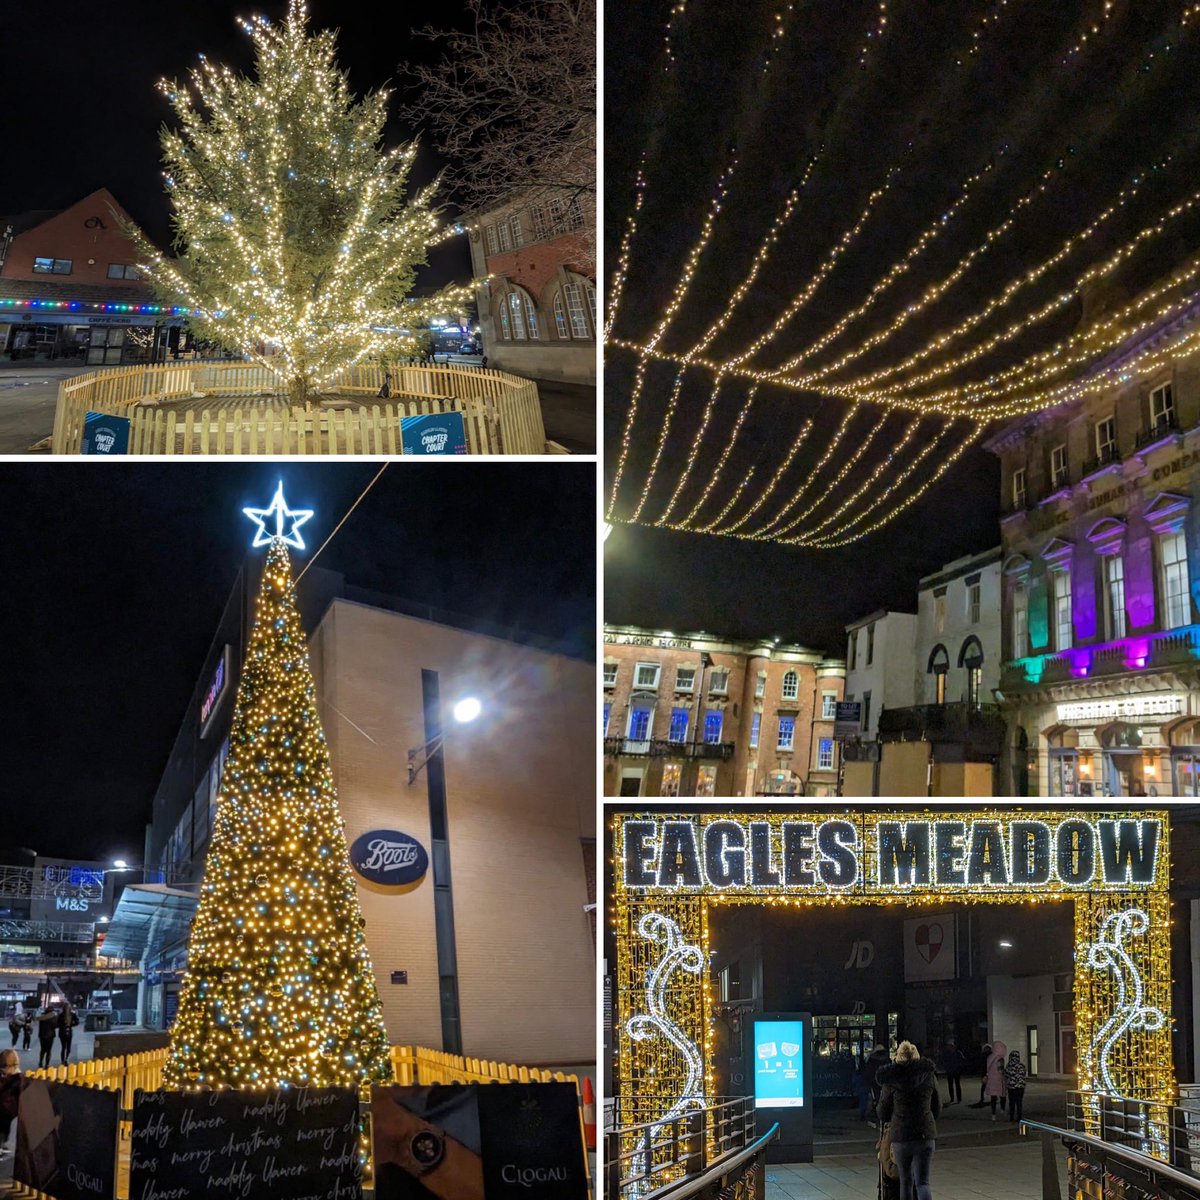 🎄Wrexham’s lights and Christmas trees look great 😍